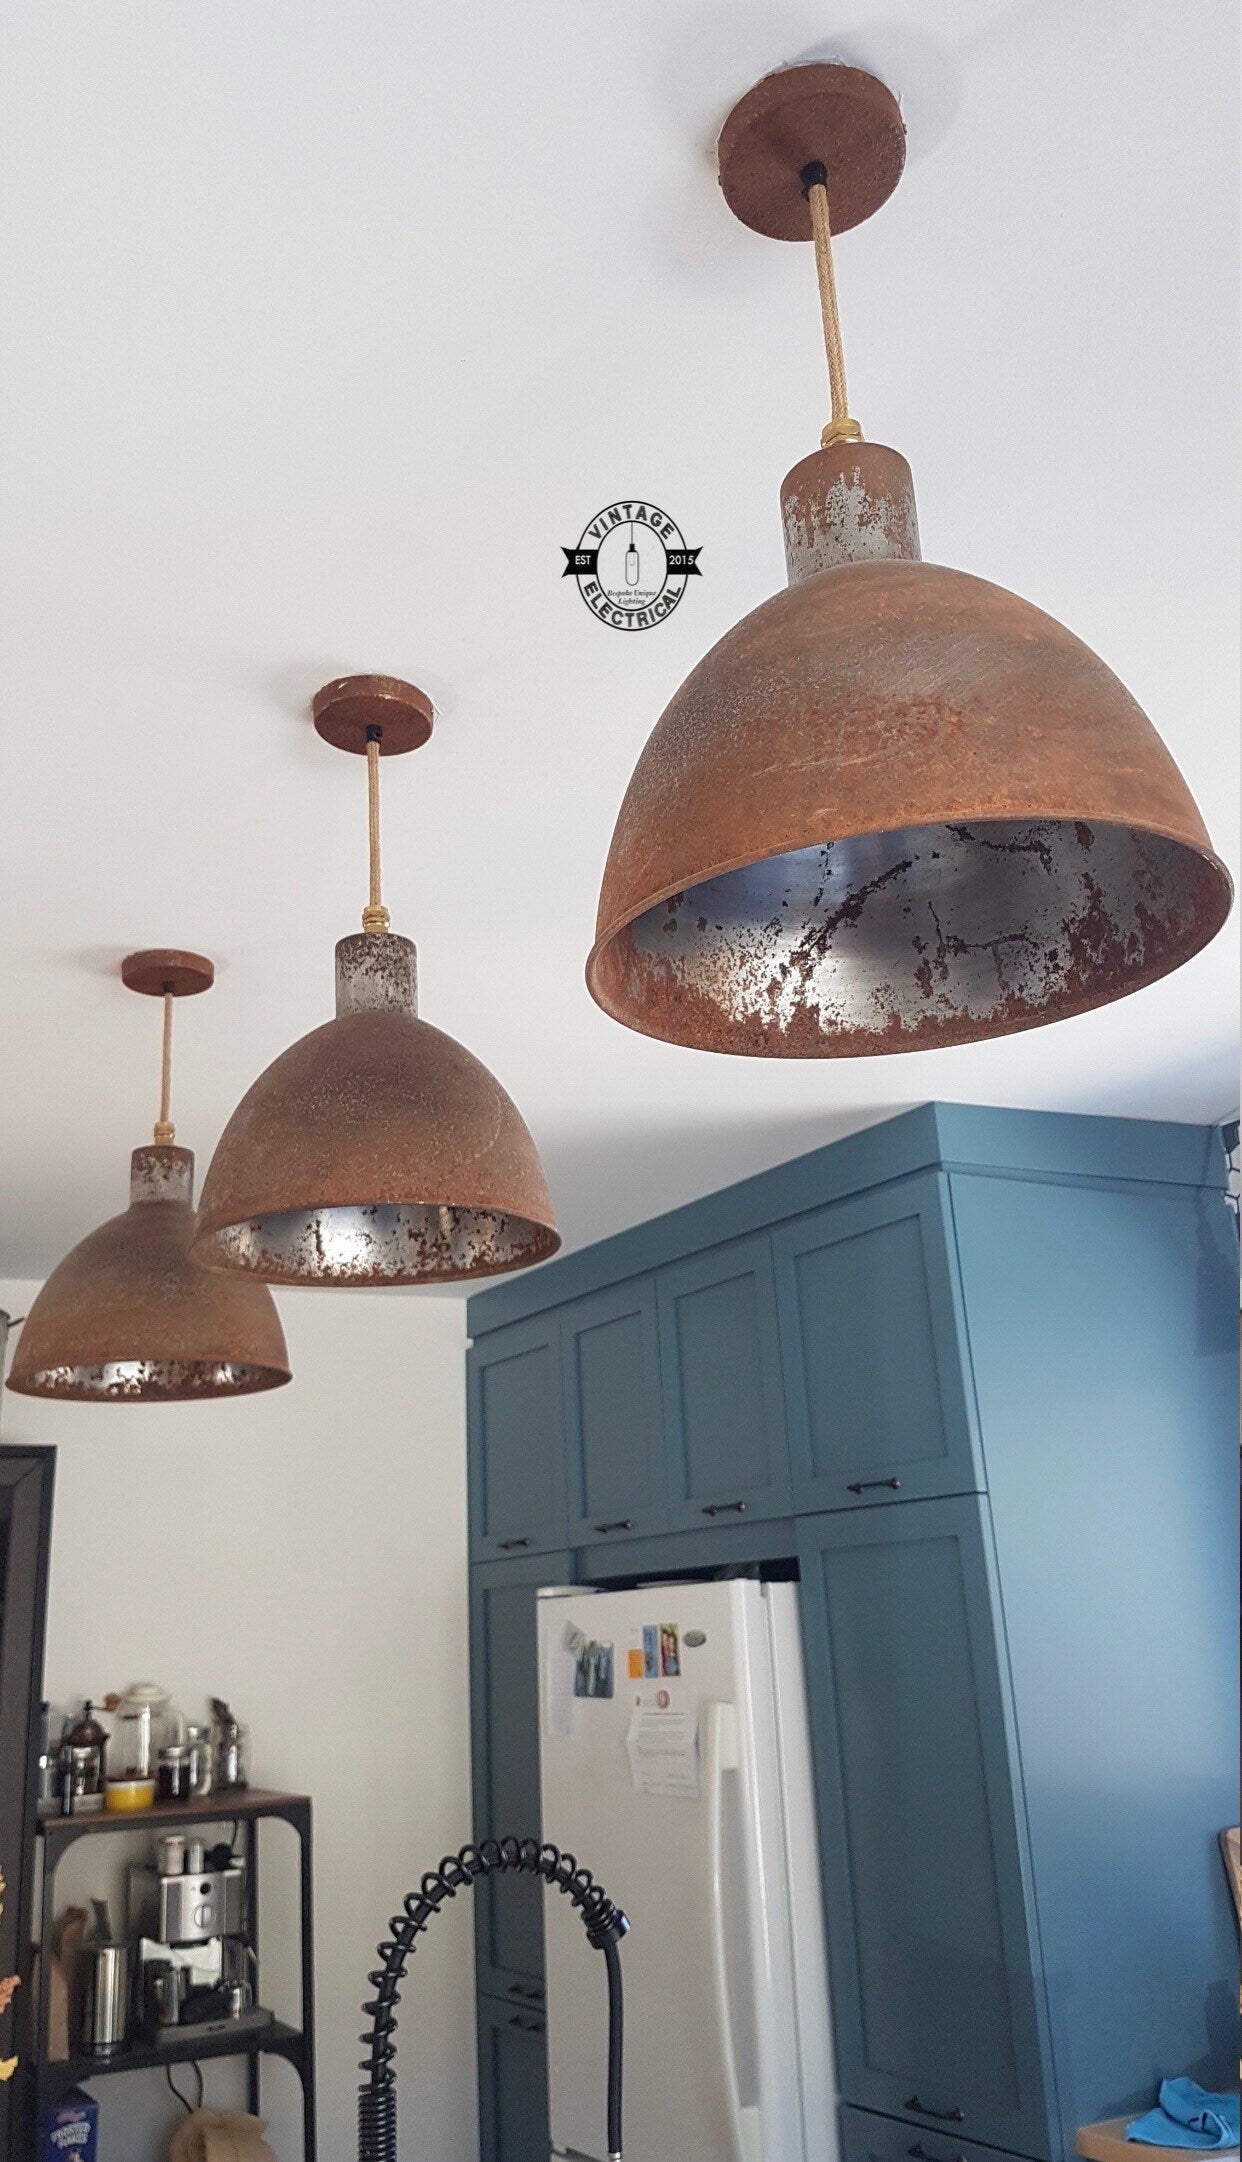 Warham ~ Rusted Solid Steel Industrial Shade Light | Ceiling Dining Room | Kitchen Table | Vintage **Shade Only**